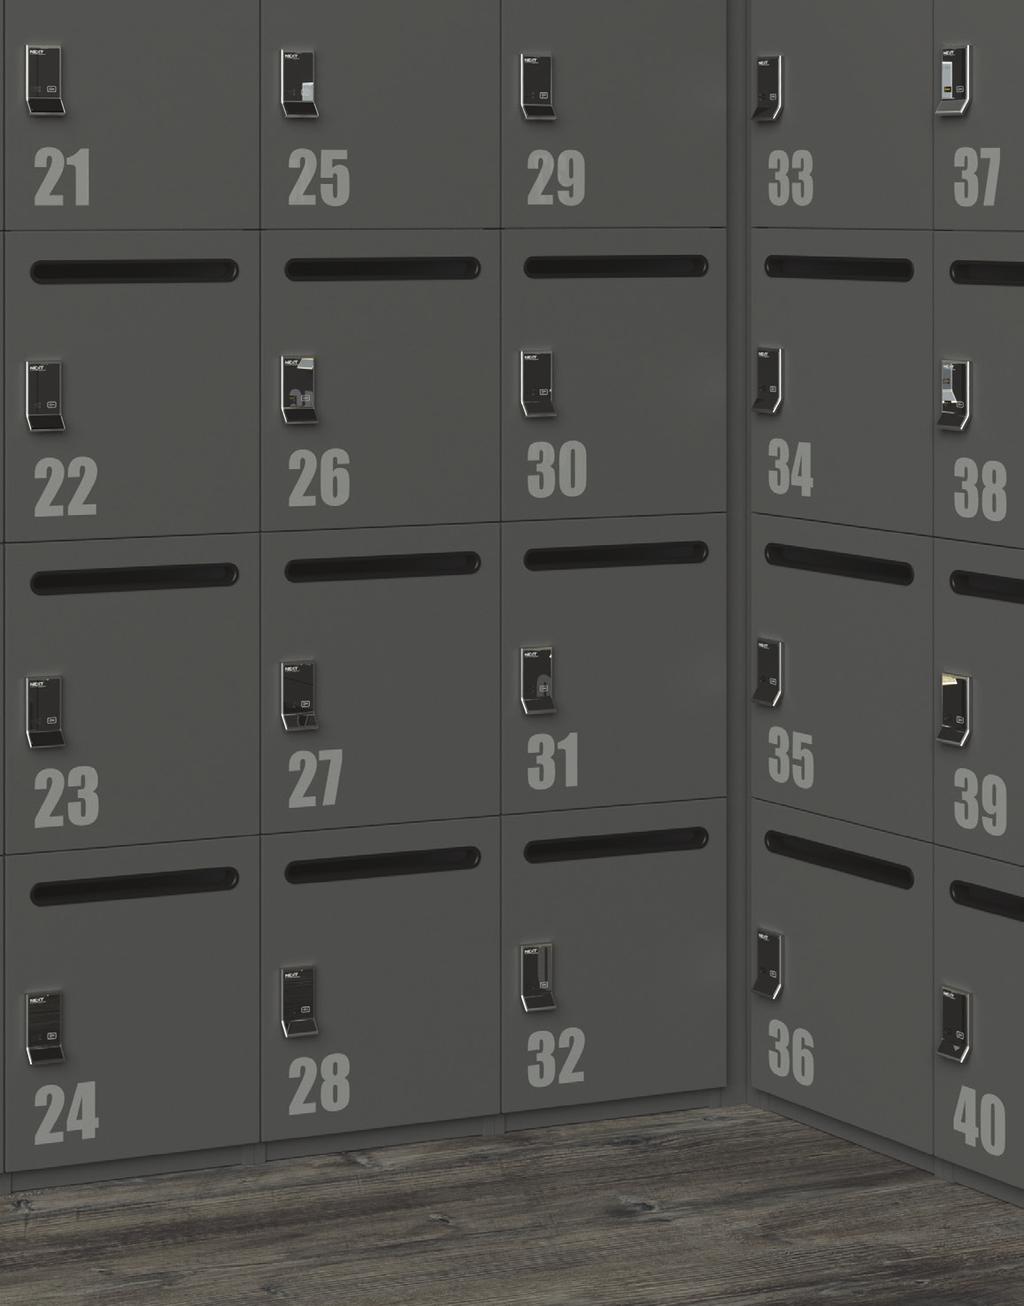 Our range of lockers can be designed specifically to your requirements Switch lockers come in four standard widths 300mm, 400mm and 500mm wide x 400mm overall depth with 1-4 compartments high.